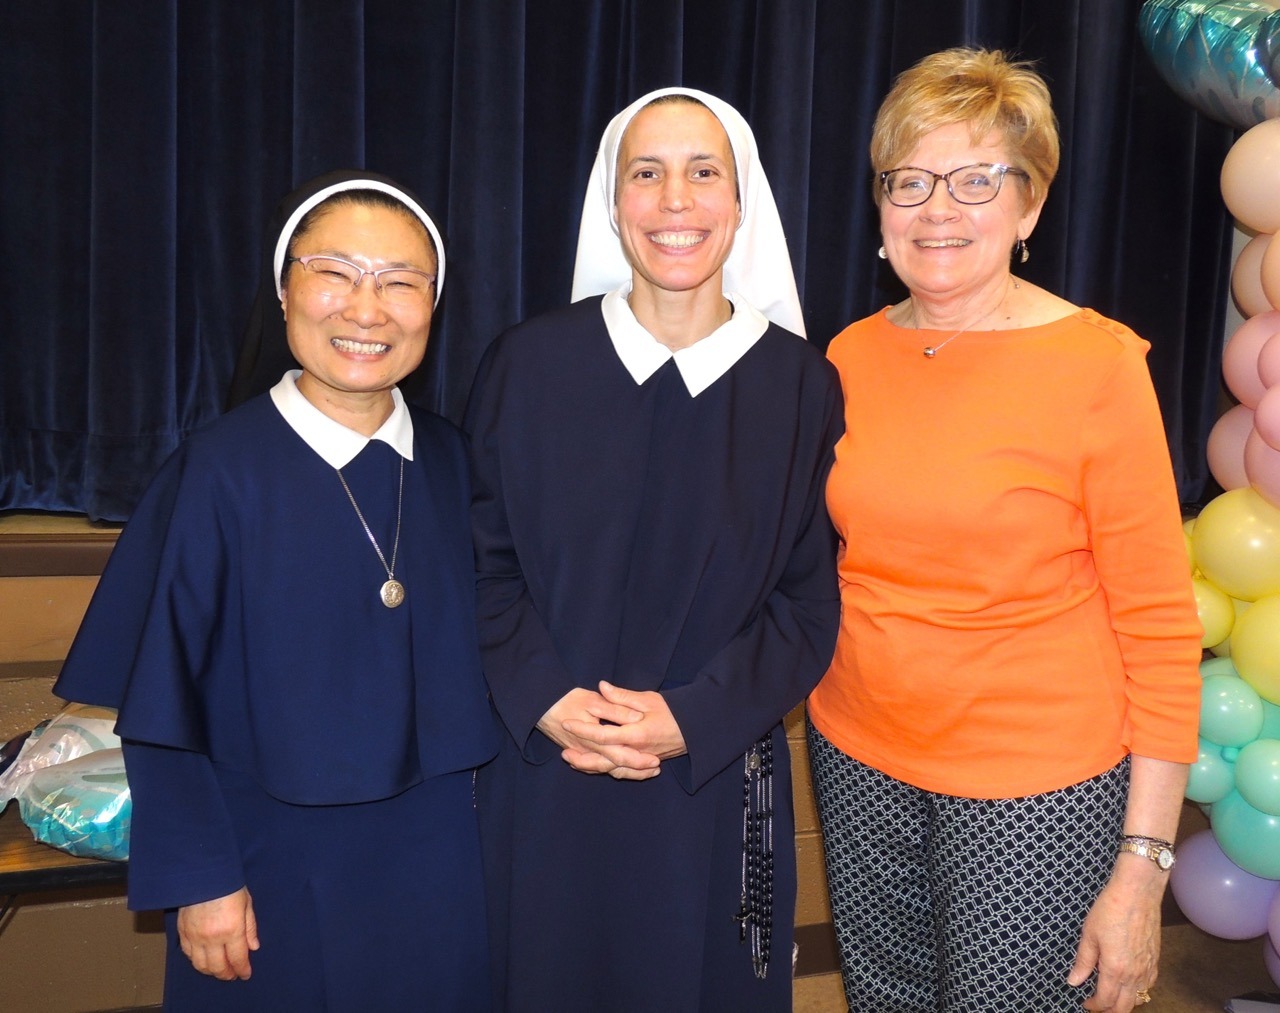 Sisters pose in a photo with lay person from Blessed Sacrament.